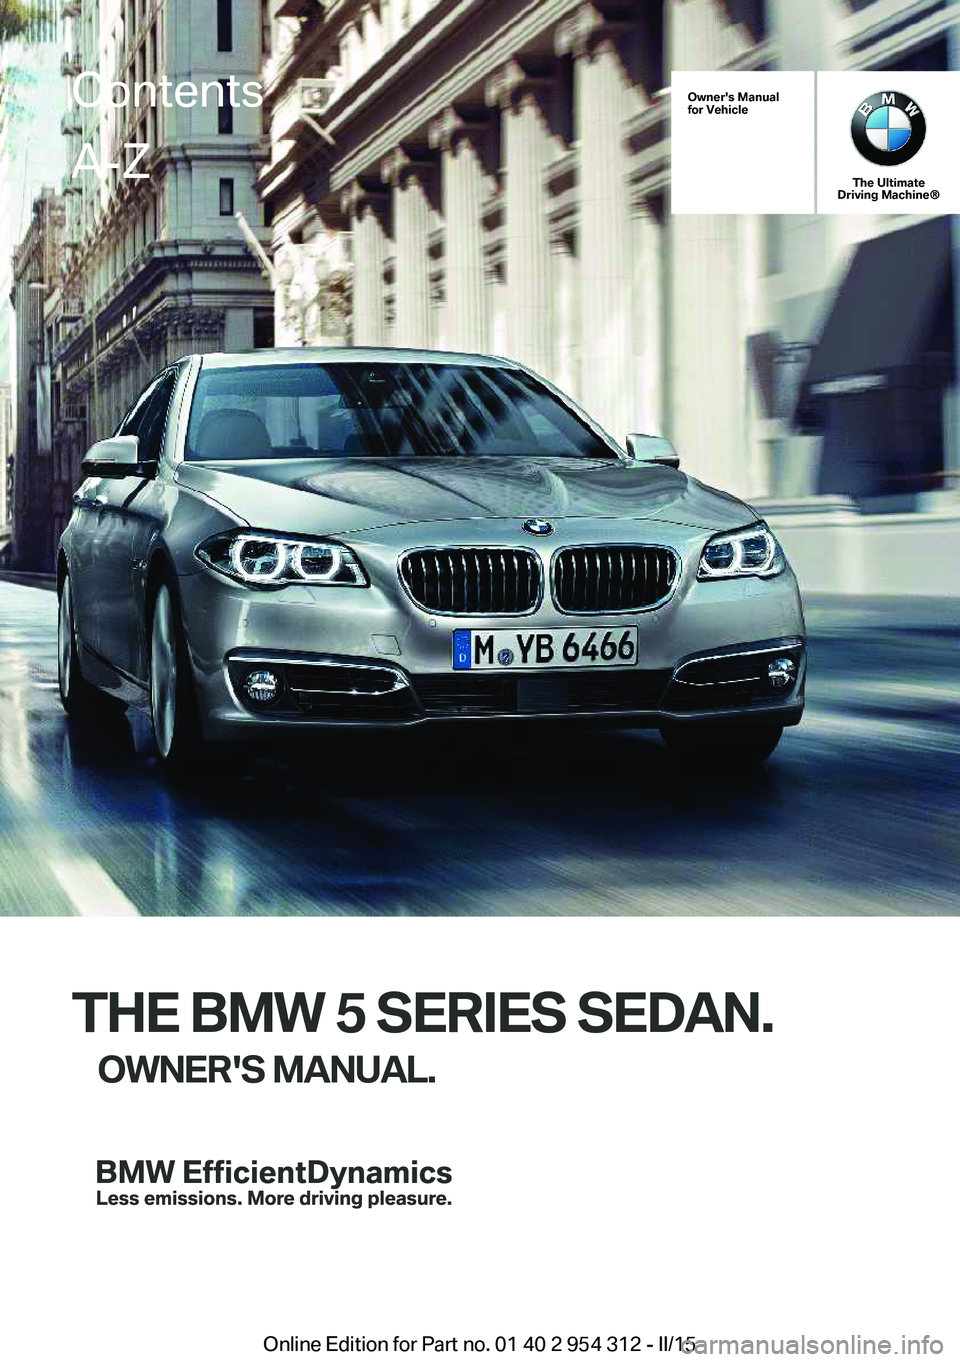 BMW 535D XDRIVE SEDAN 2015  Owners Manual Owner's Manual
for Vehicle
The Ultimate
Driving Machine®
THE BMW 5 SERIES SEDAN.
OWNER'S MANUAL.
ContentsA-Z
Online Edition for Part no. 01 40 2 954 312 - II/15   